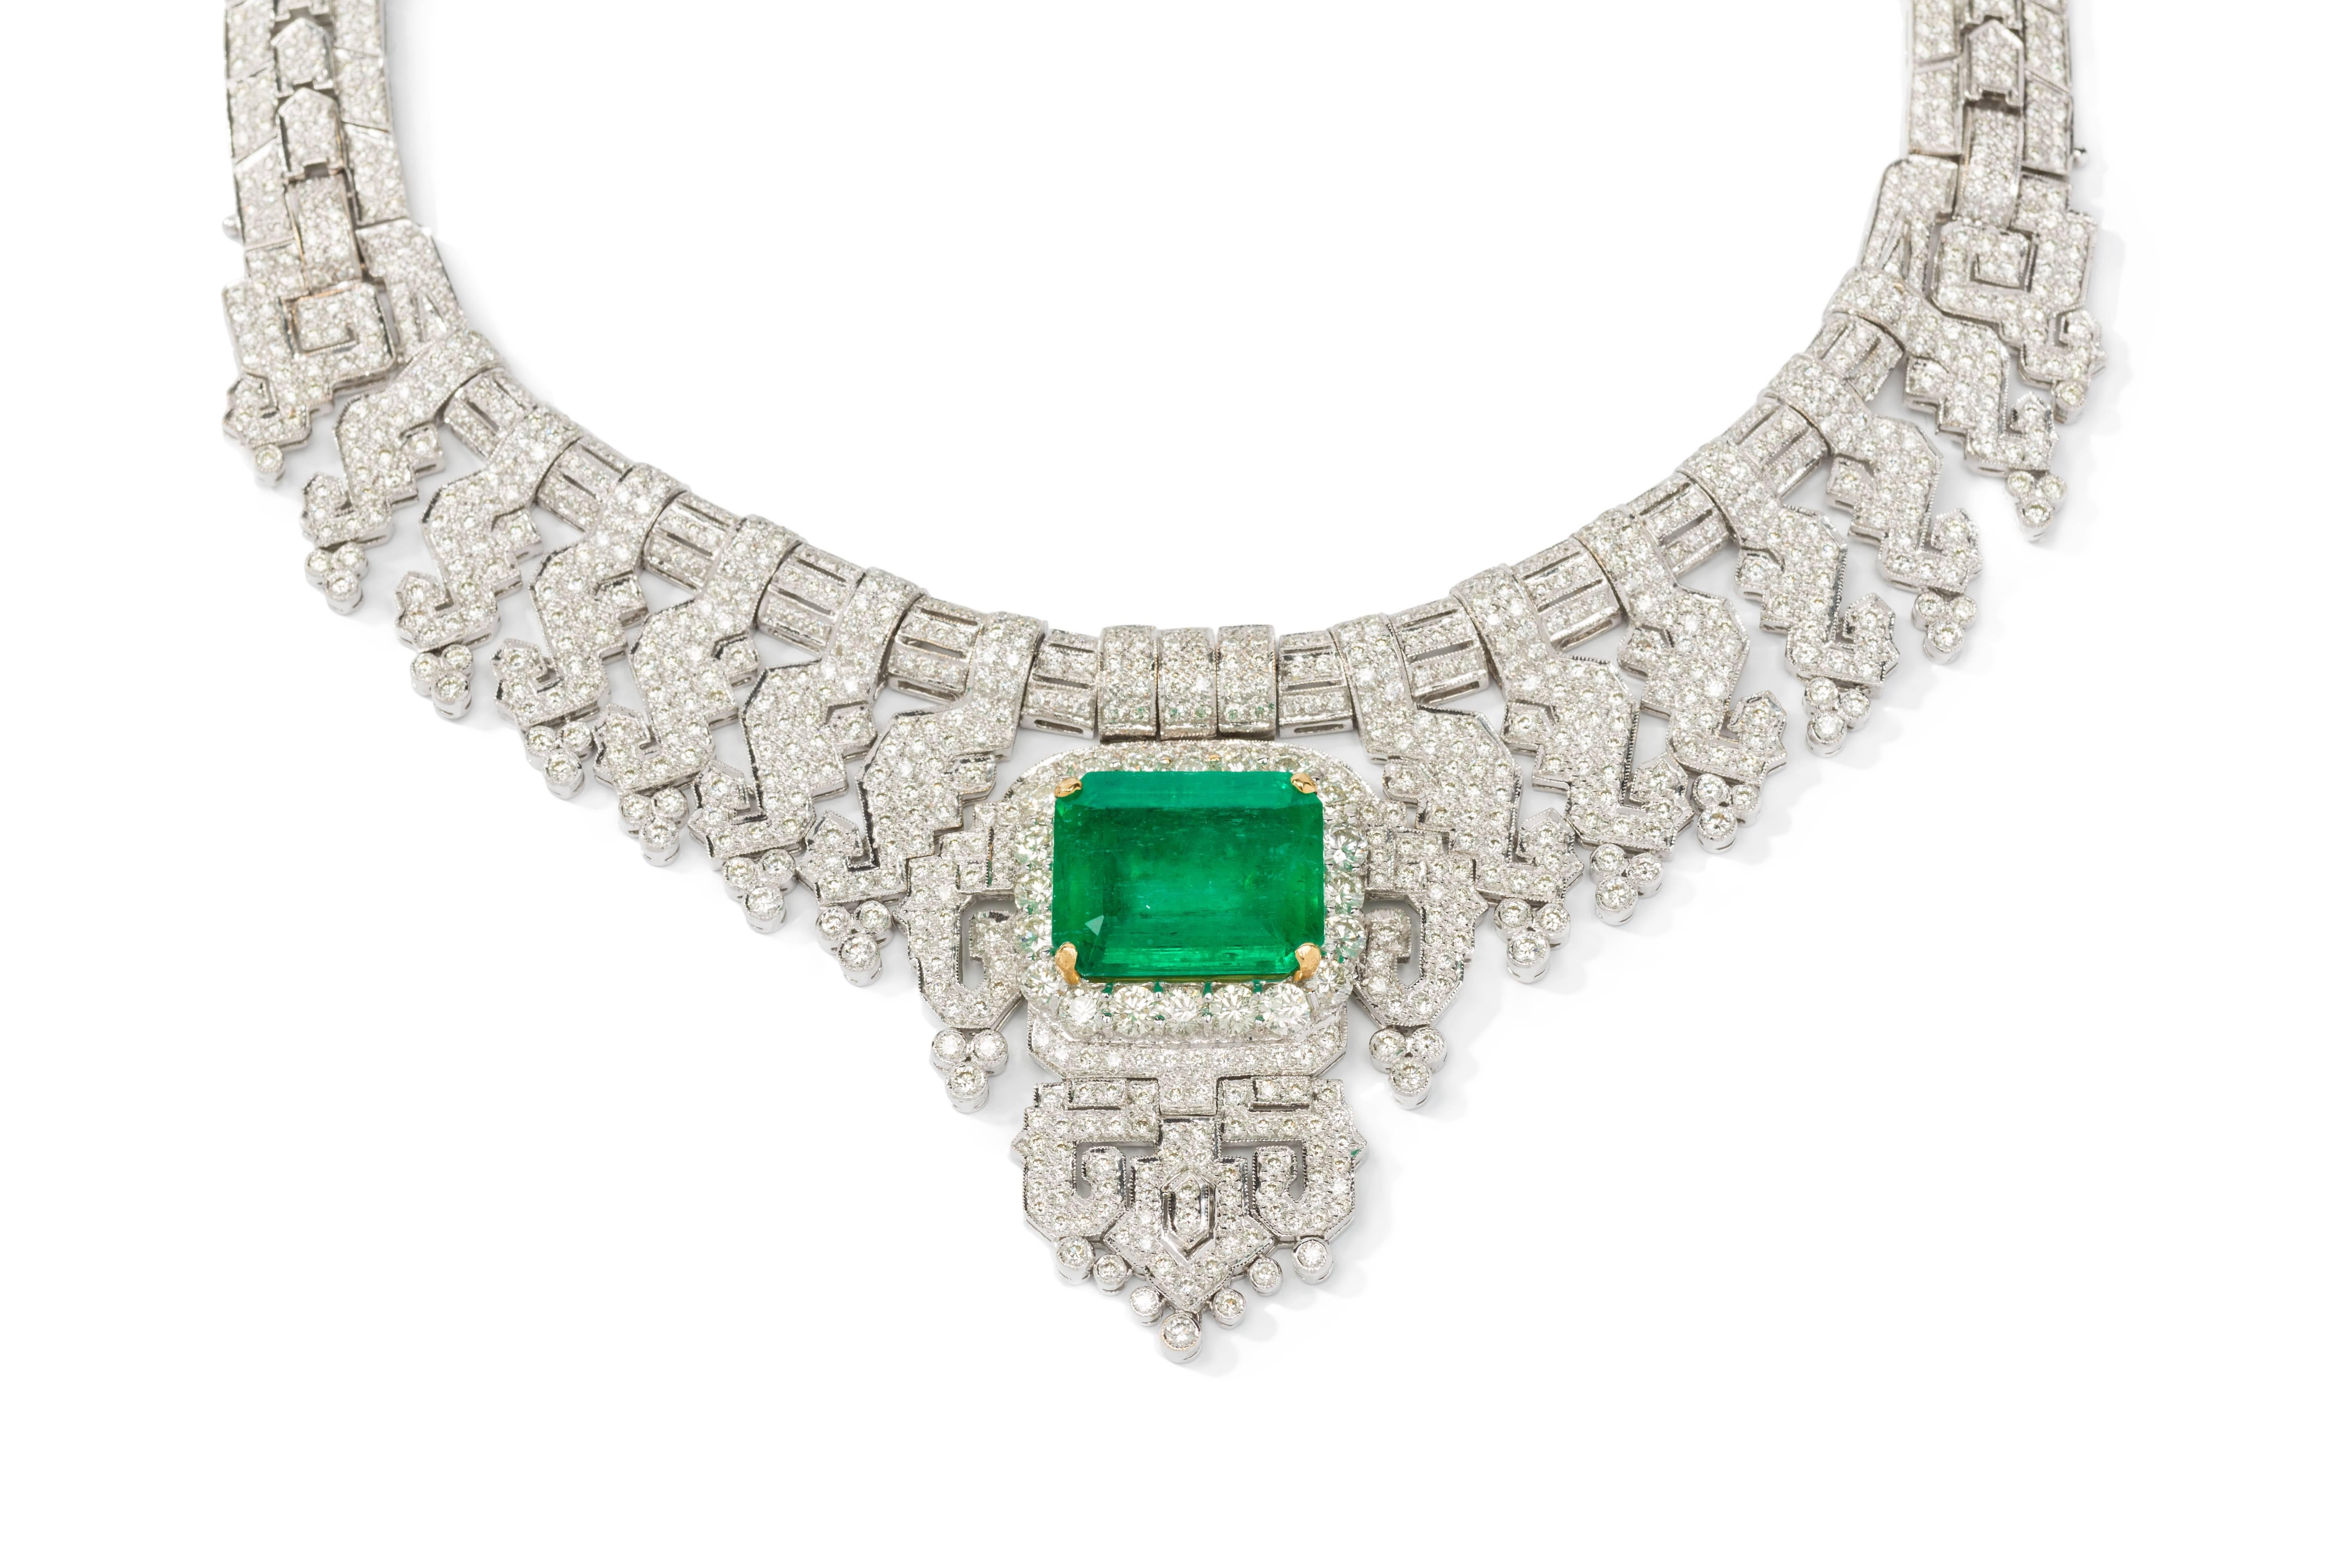 Attributed to Cartier. Featuring one Colombian emerald in emerald-cut weighing 24,40 ct. Enhanced by 1274 brilliant-cut diamonds weighing 28,80 ct. Mounted in 18K white- and yellow gold. Total weight: 178,73 g. Length: ca. 18.11 in ( 46 cm )